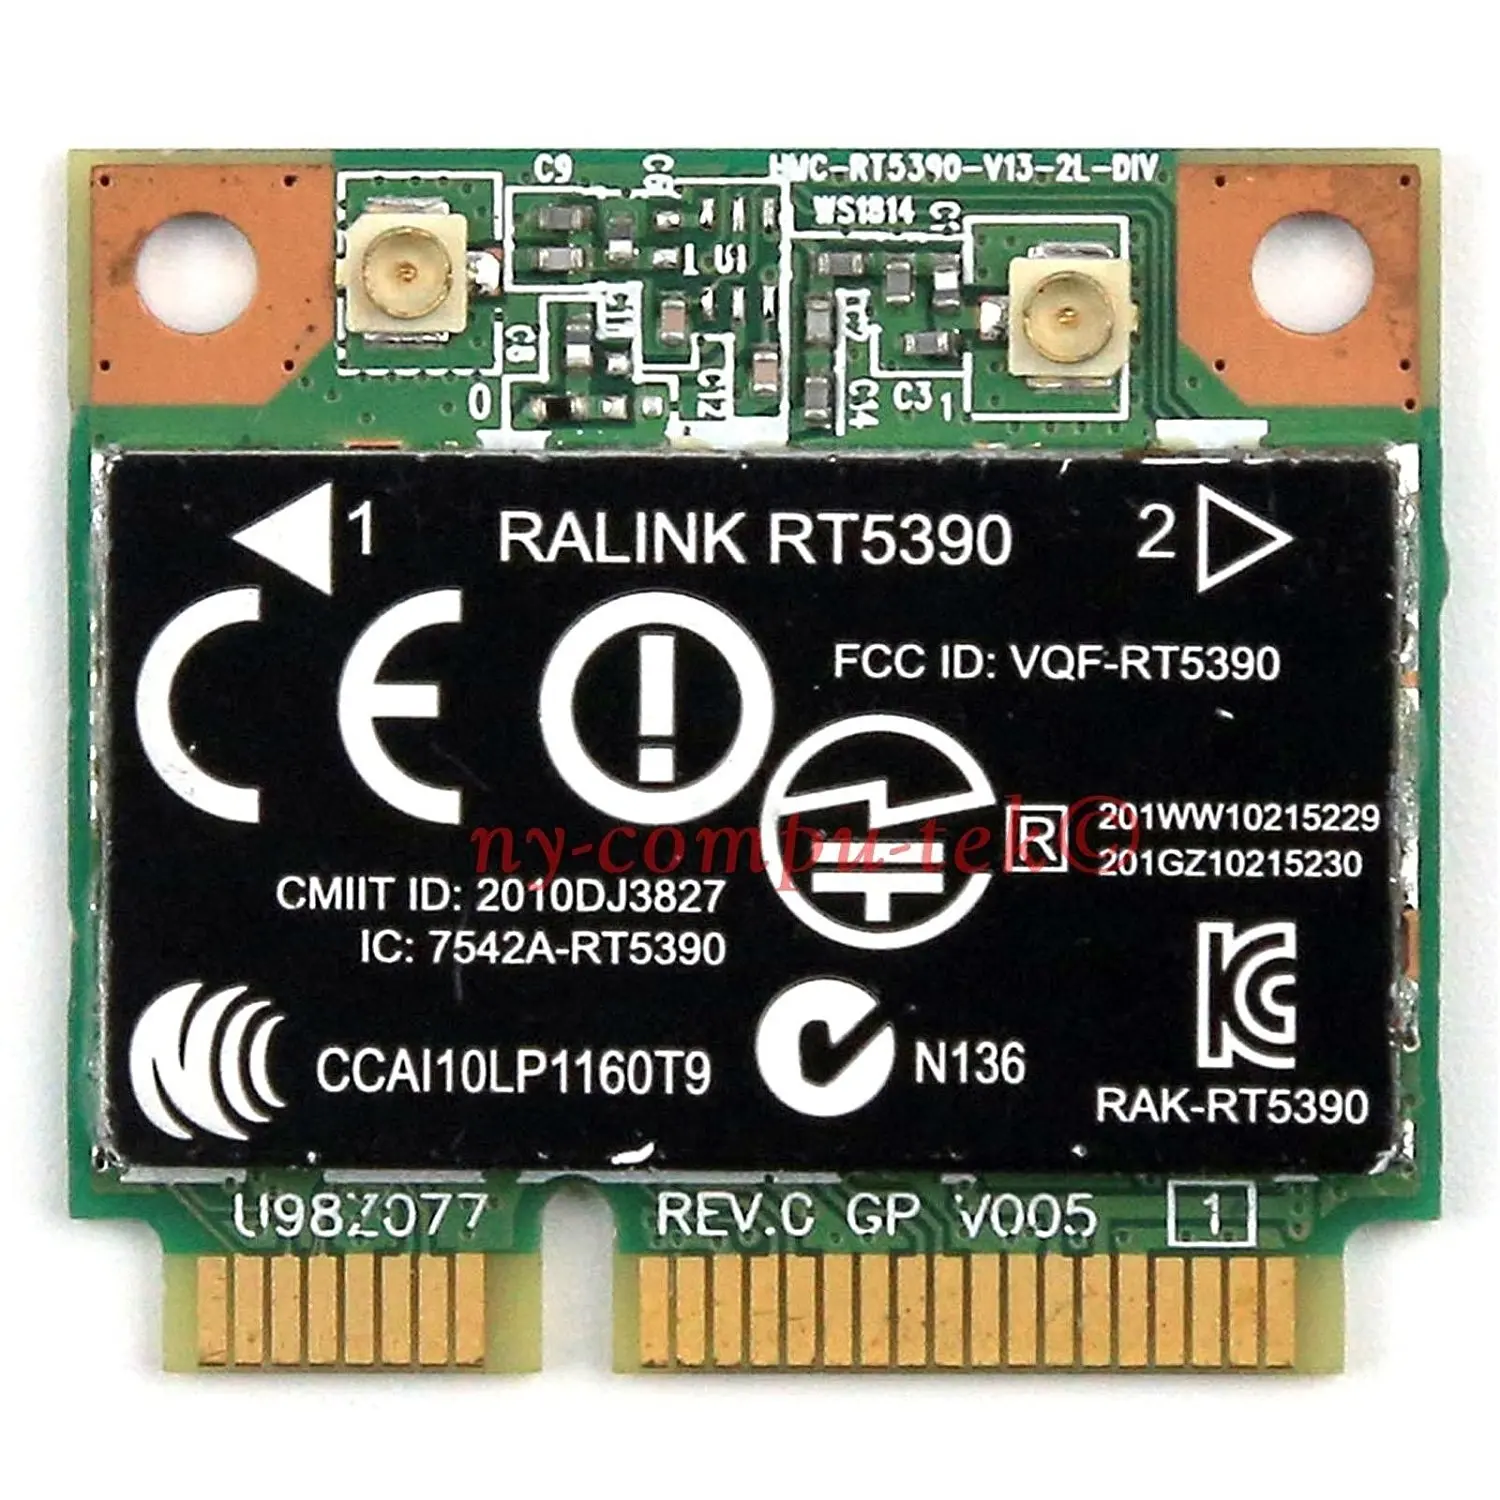 can i safely delete ralink rt2870 wireless lan card